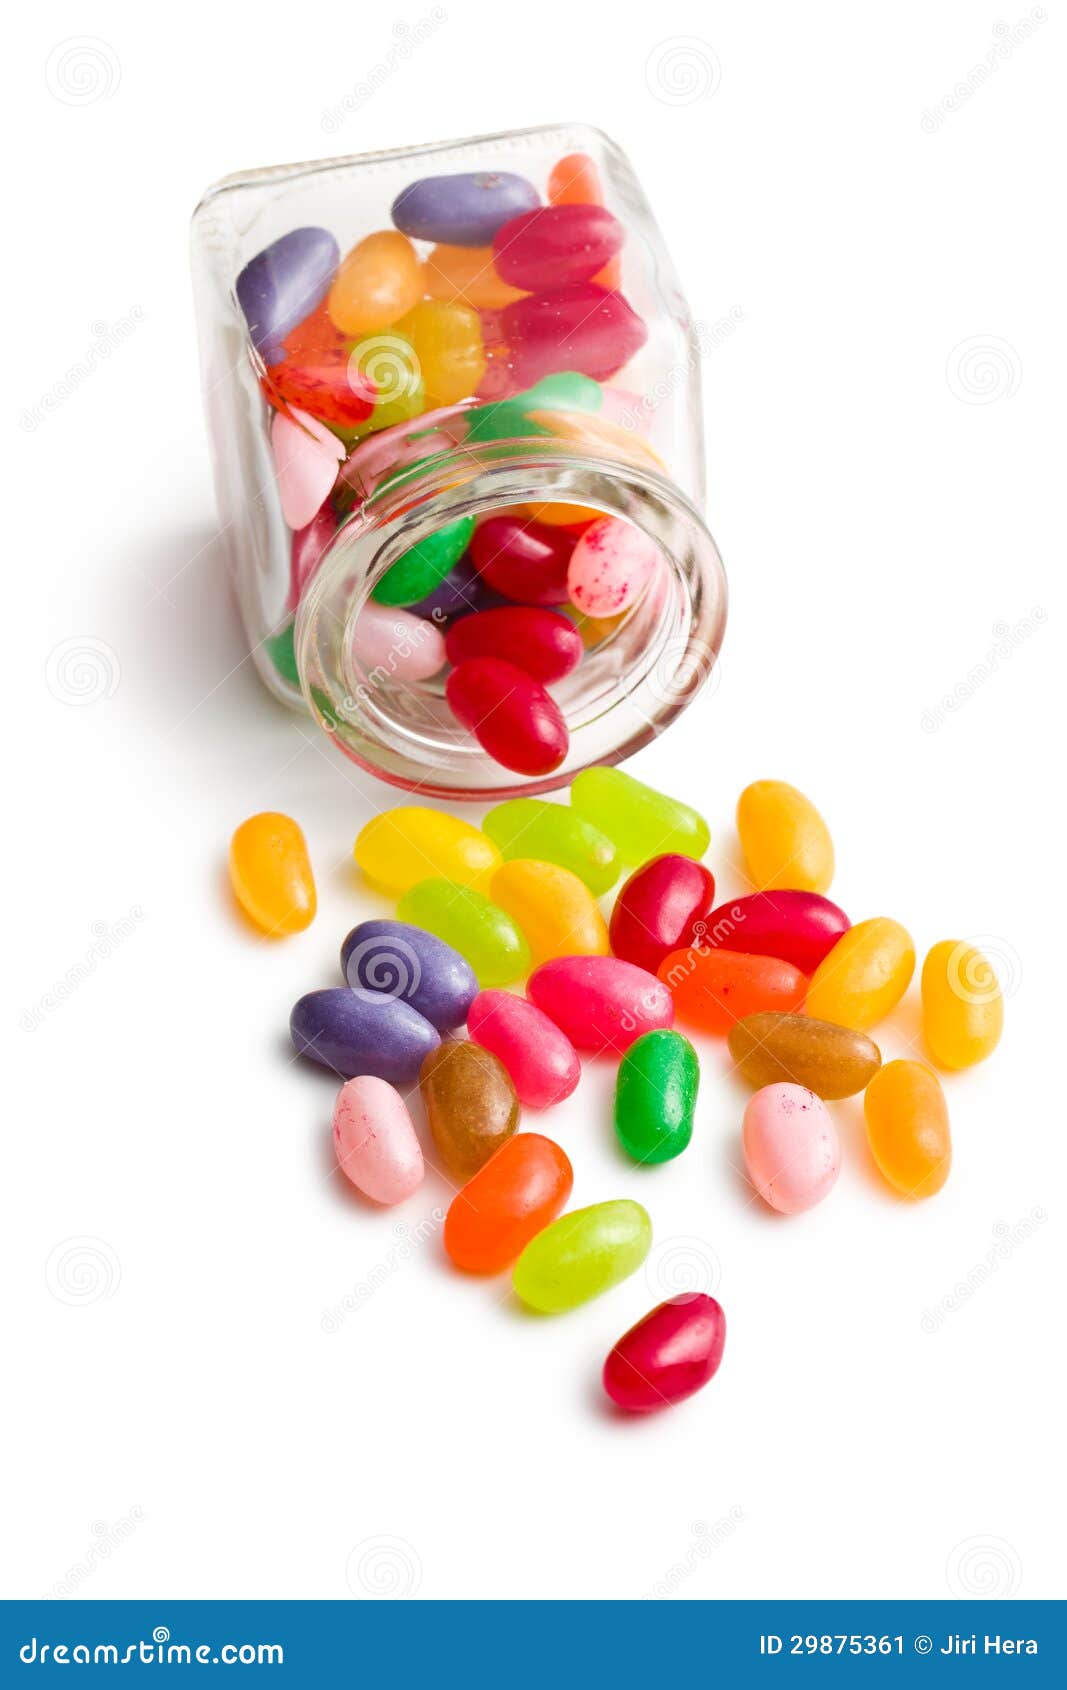 Jelly beans in glass jar stock image. Image of colour - 29875361